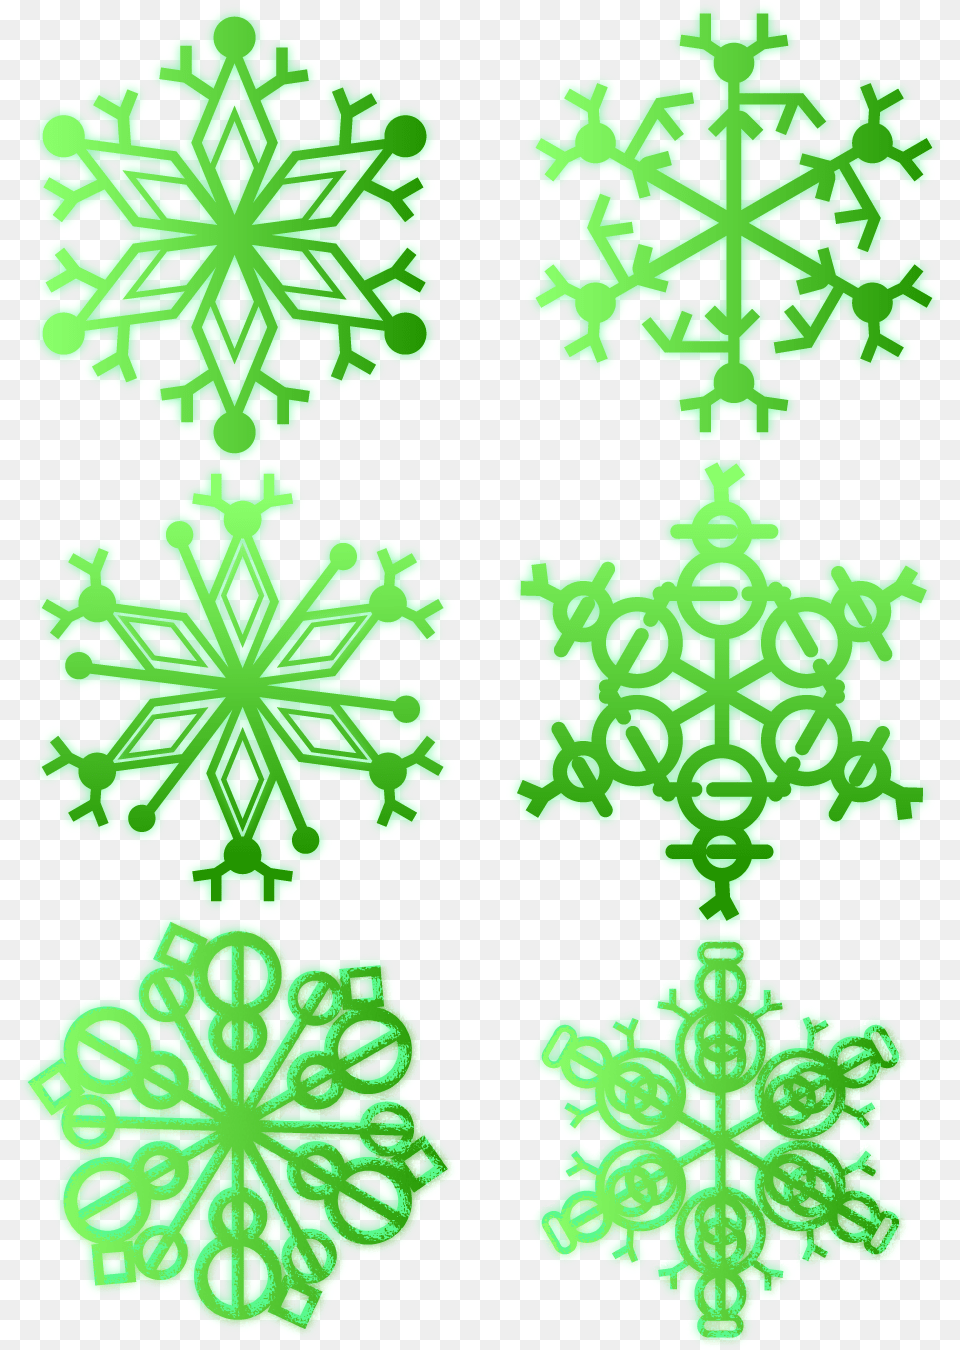 Green Snowflake Glow Fresh And Vector Image, Nature, Outdoors, Pattern, Snow Free Png